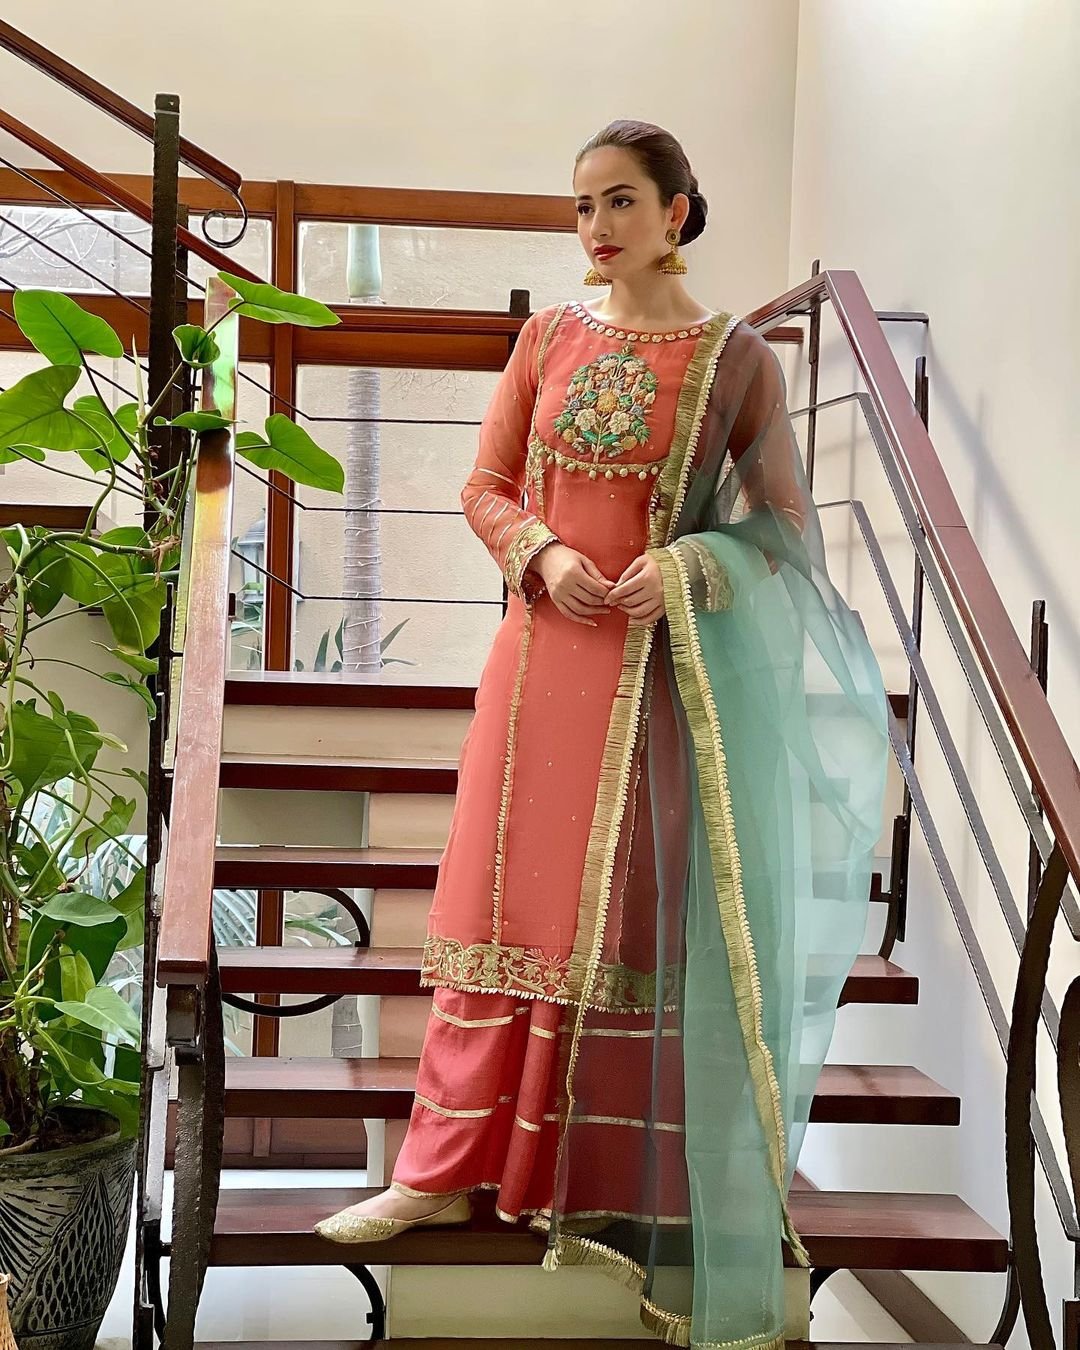 Sana Javed ignites fashion world with her peachy Outfit